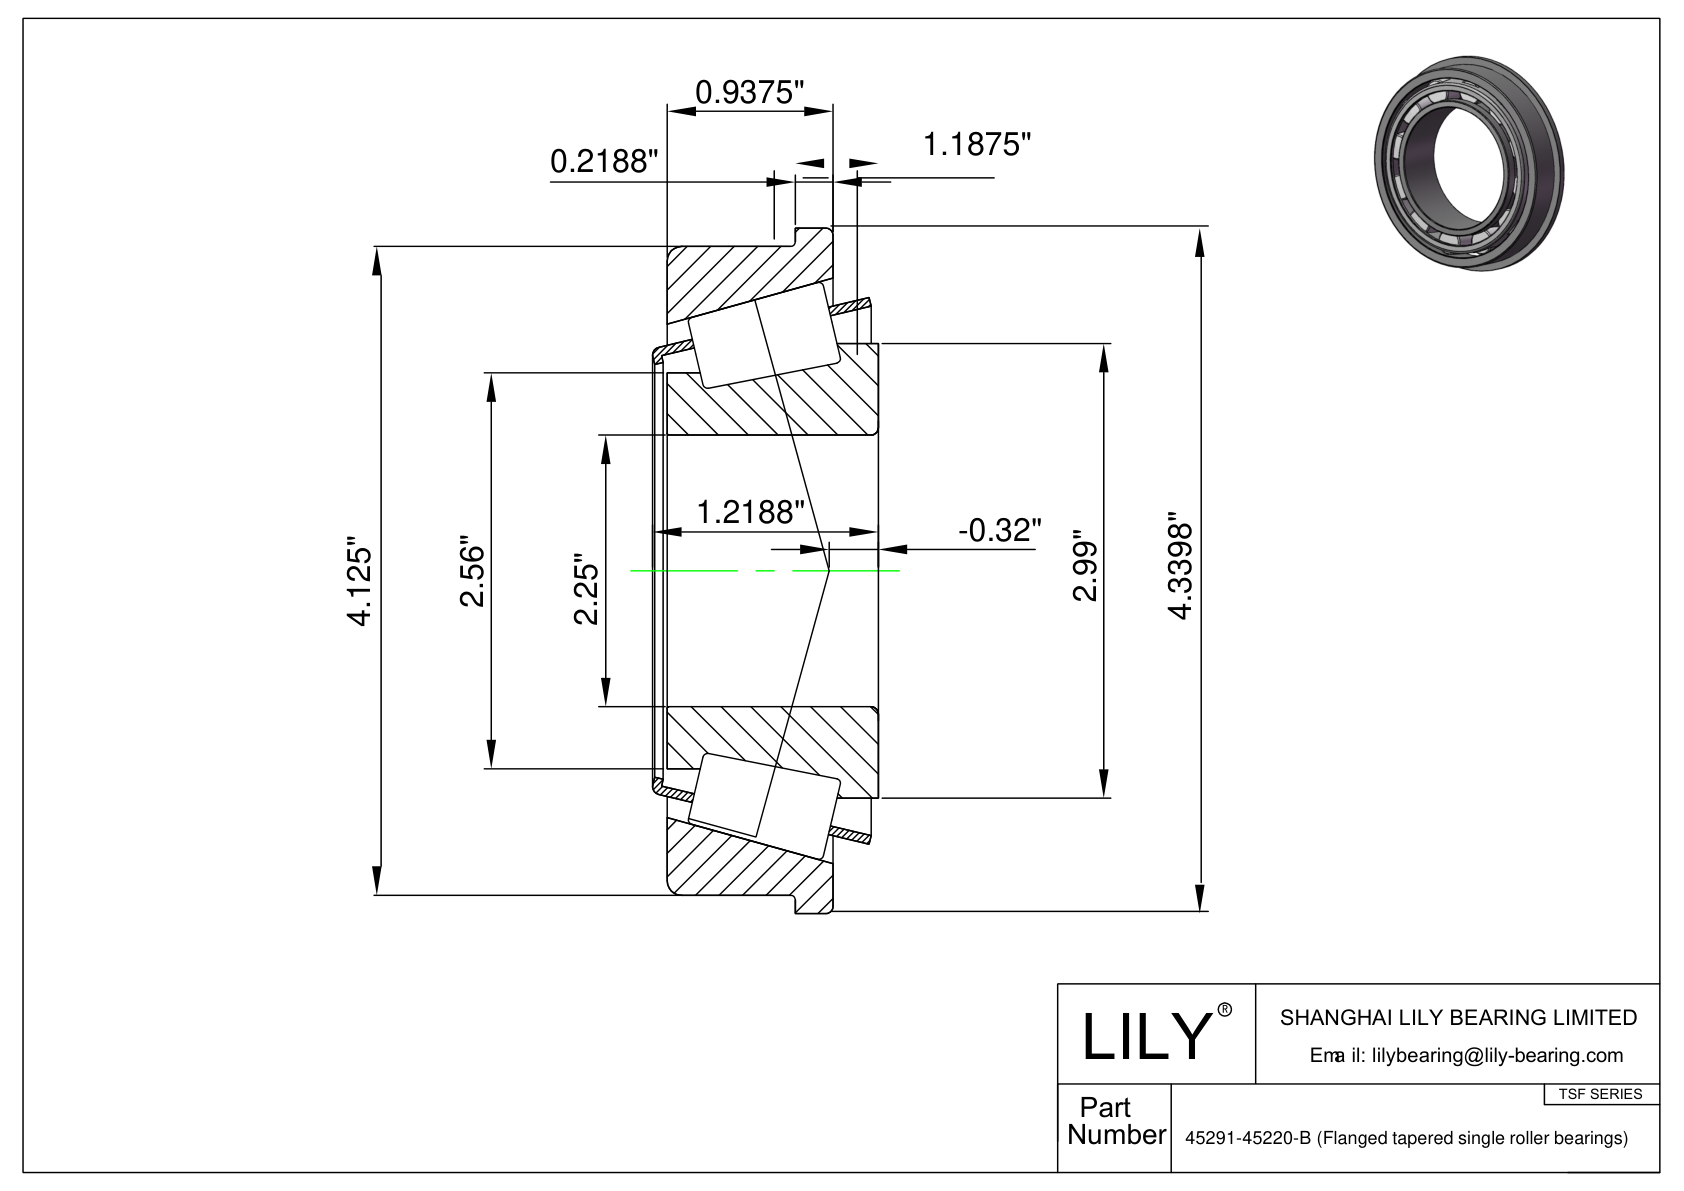 45291-45220-B TSF (Tapered Single Roller Bearings with Flange) (Imperial) cad drawing